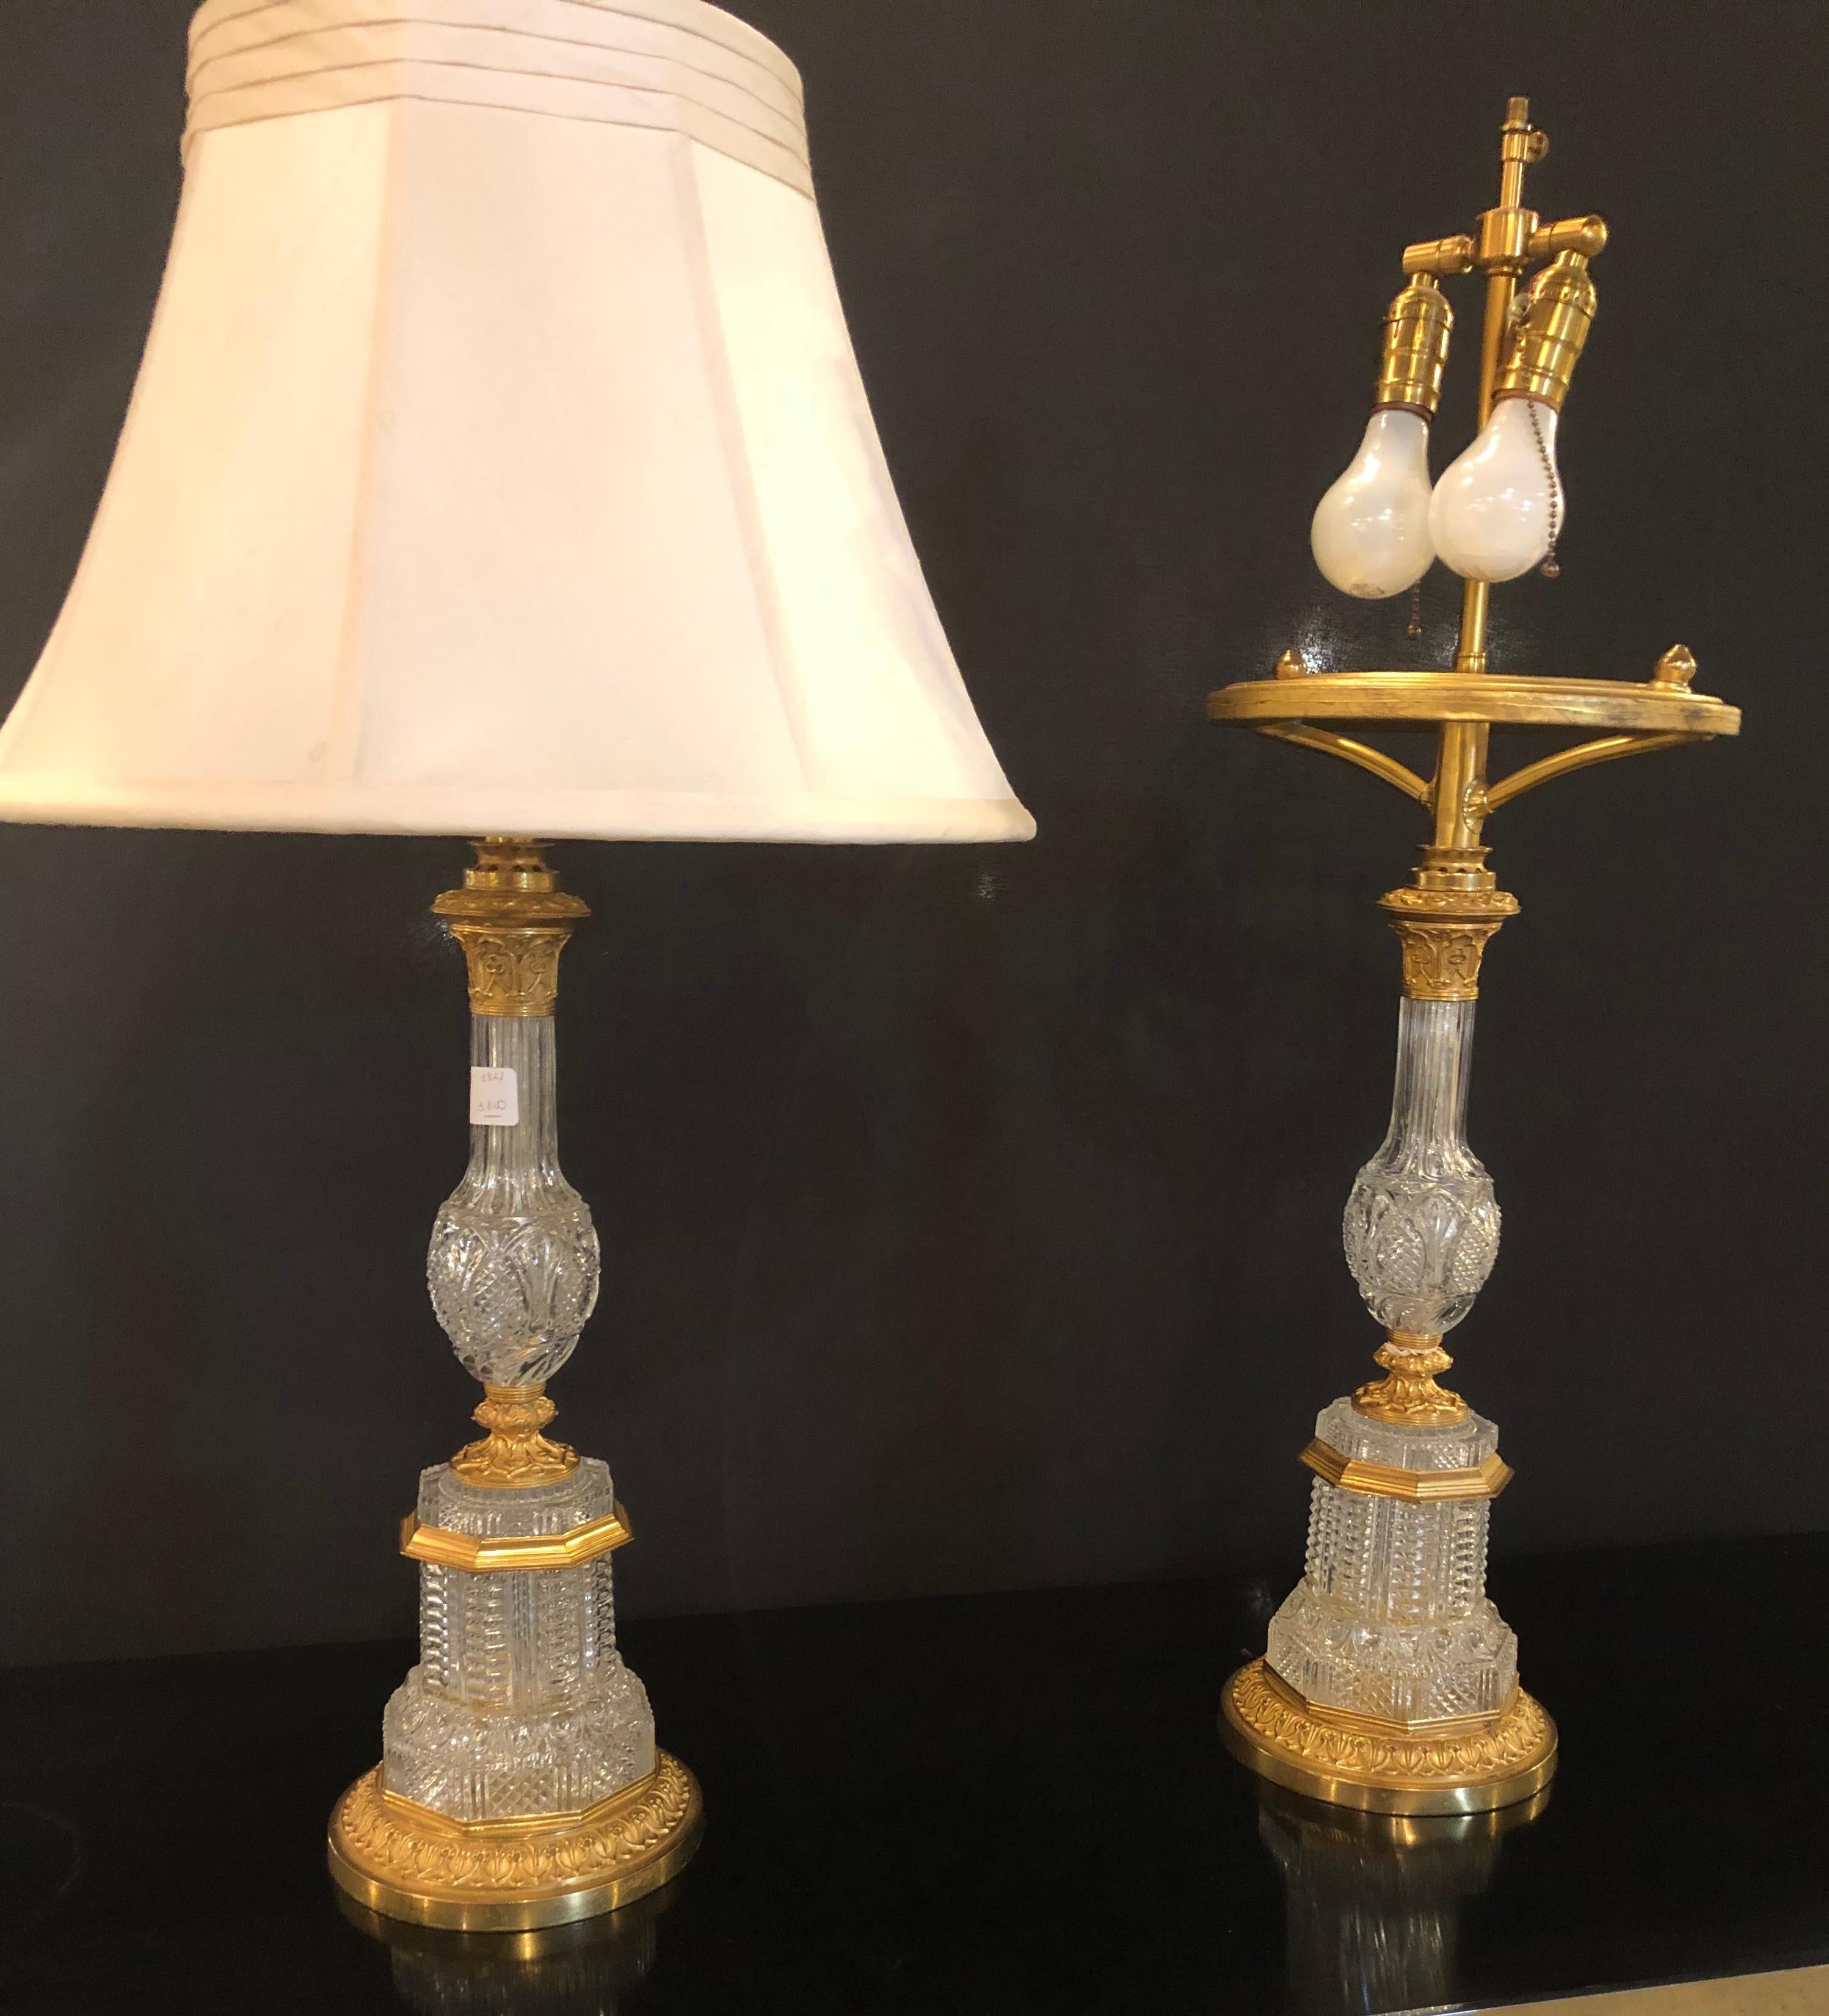 Pair of Gilt Metal Deco Cut Crystal Antique Oil Lamps Converted into Table Lamps 4